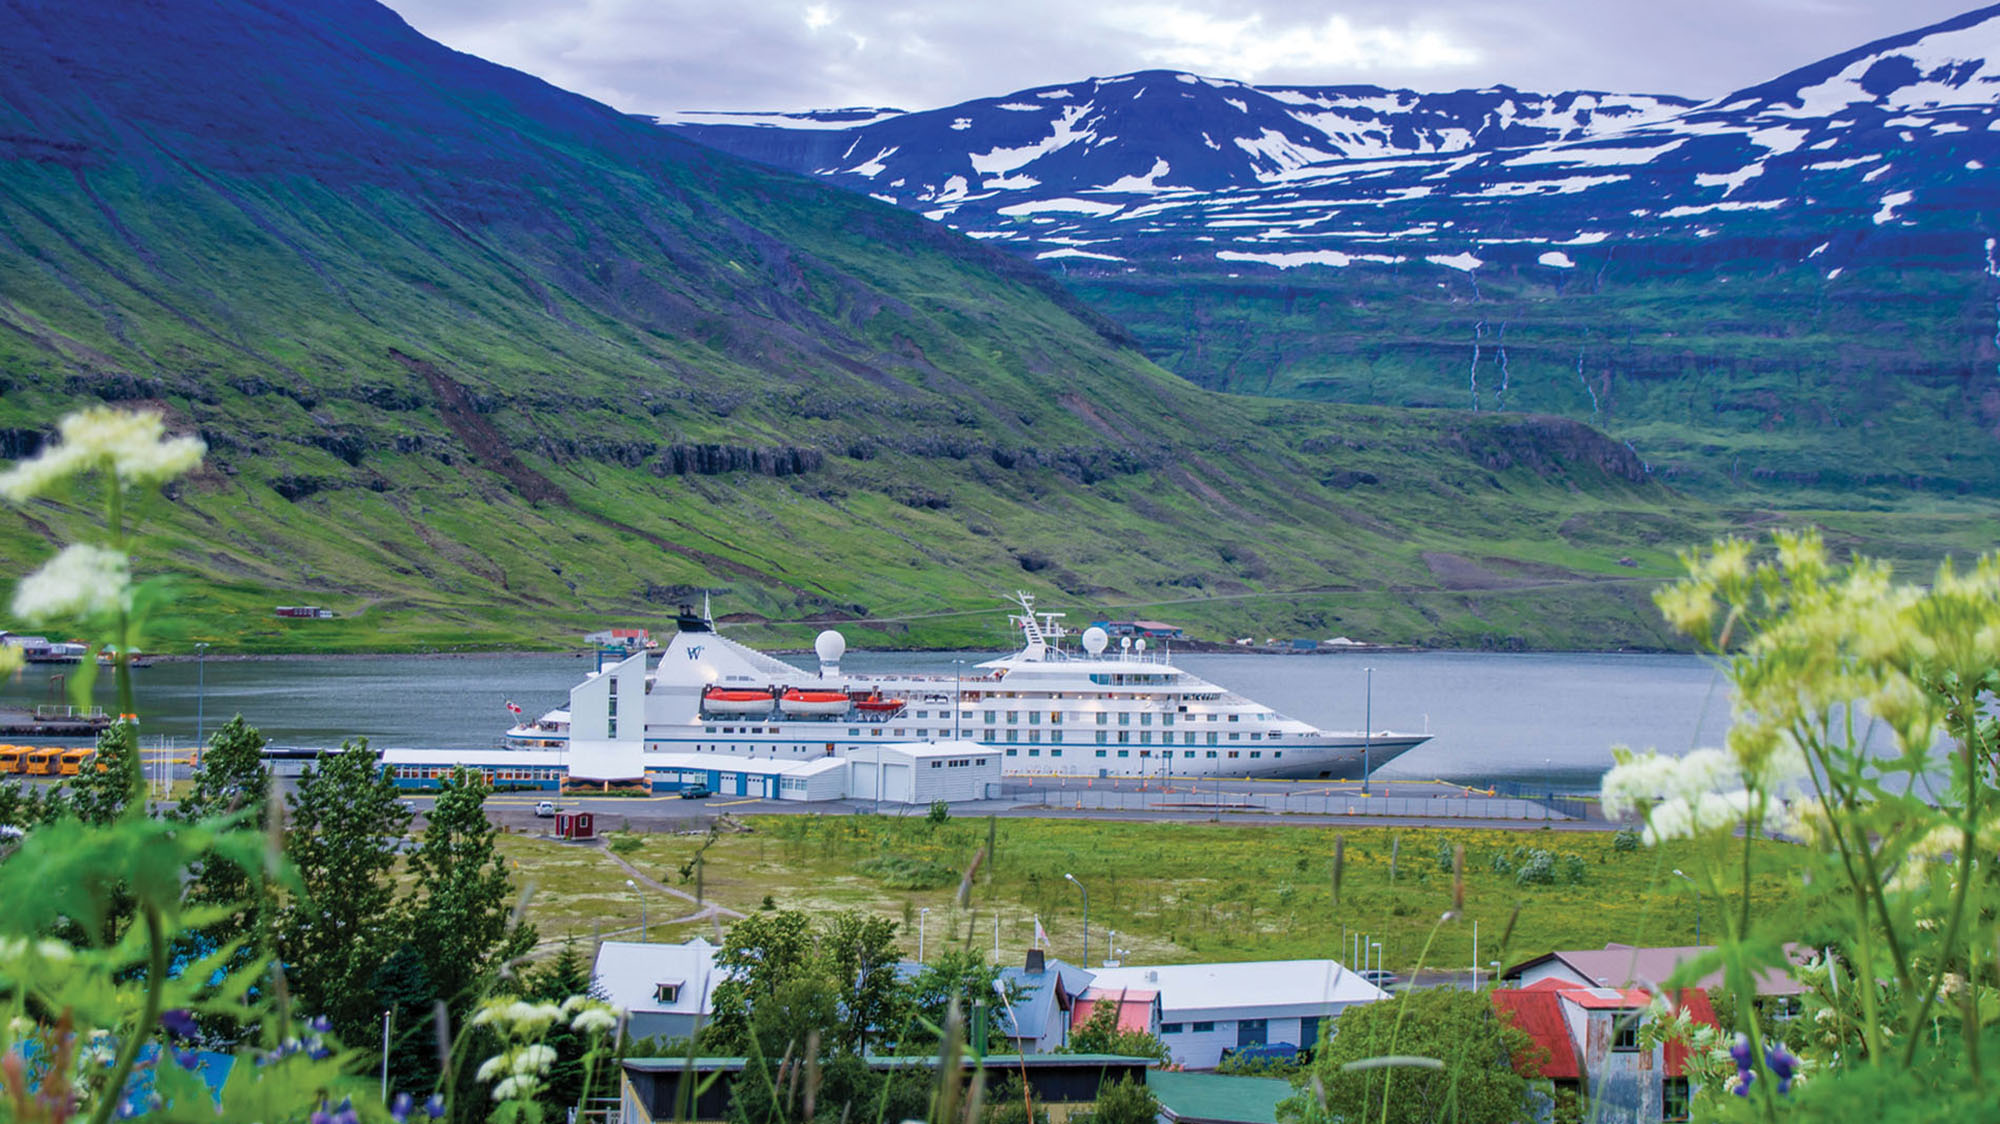 A Windstar ship in Iceland.